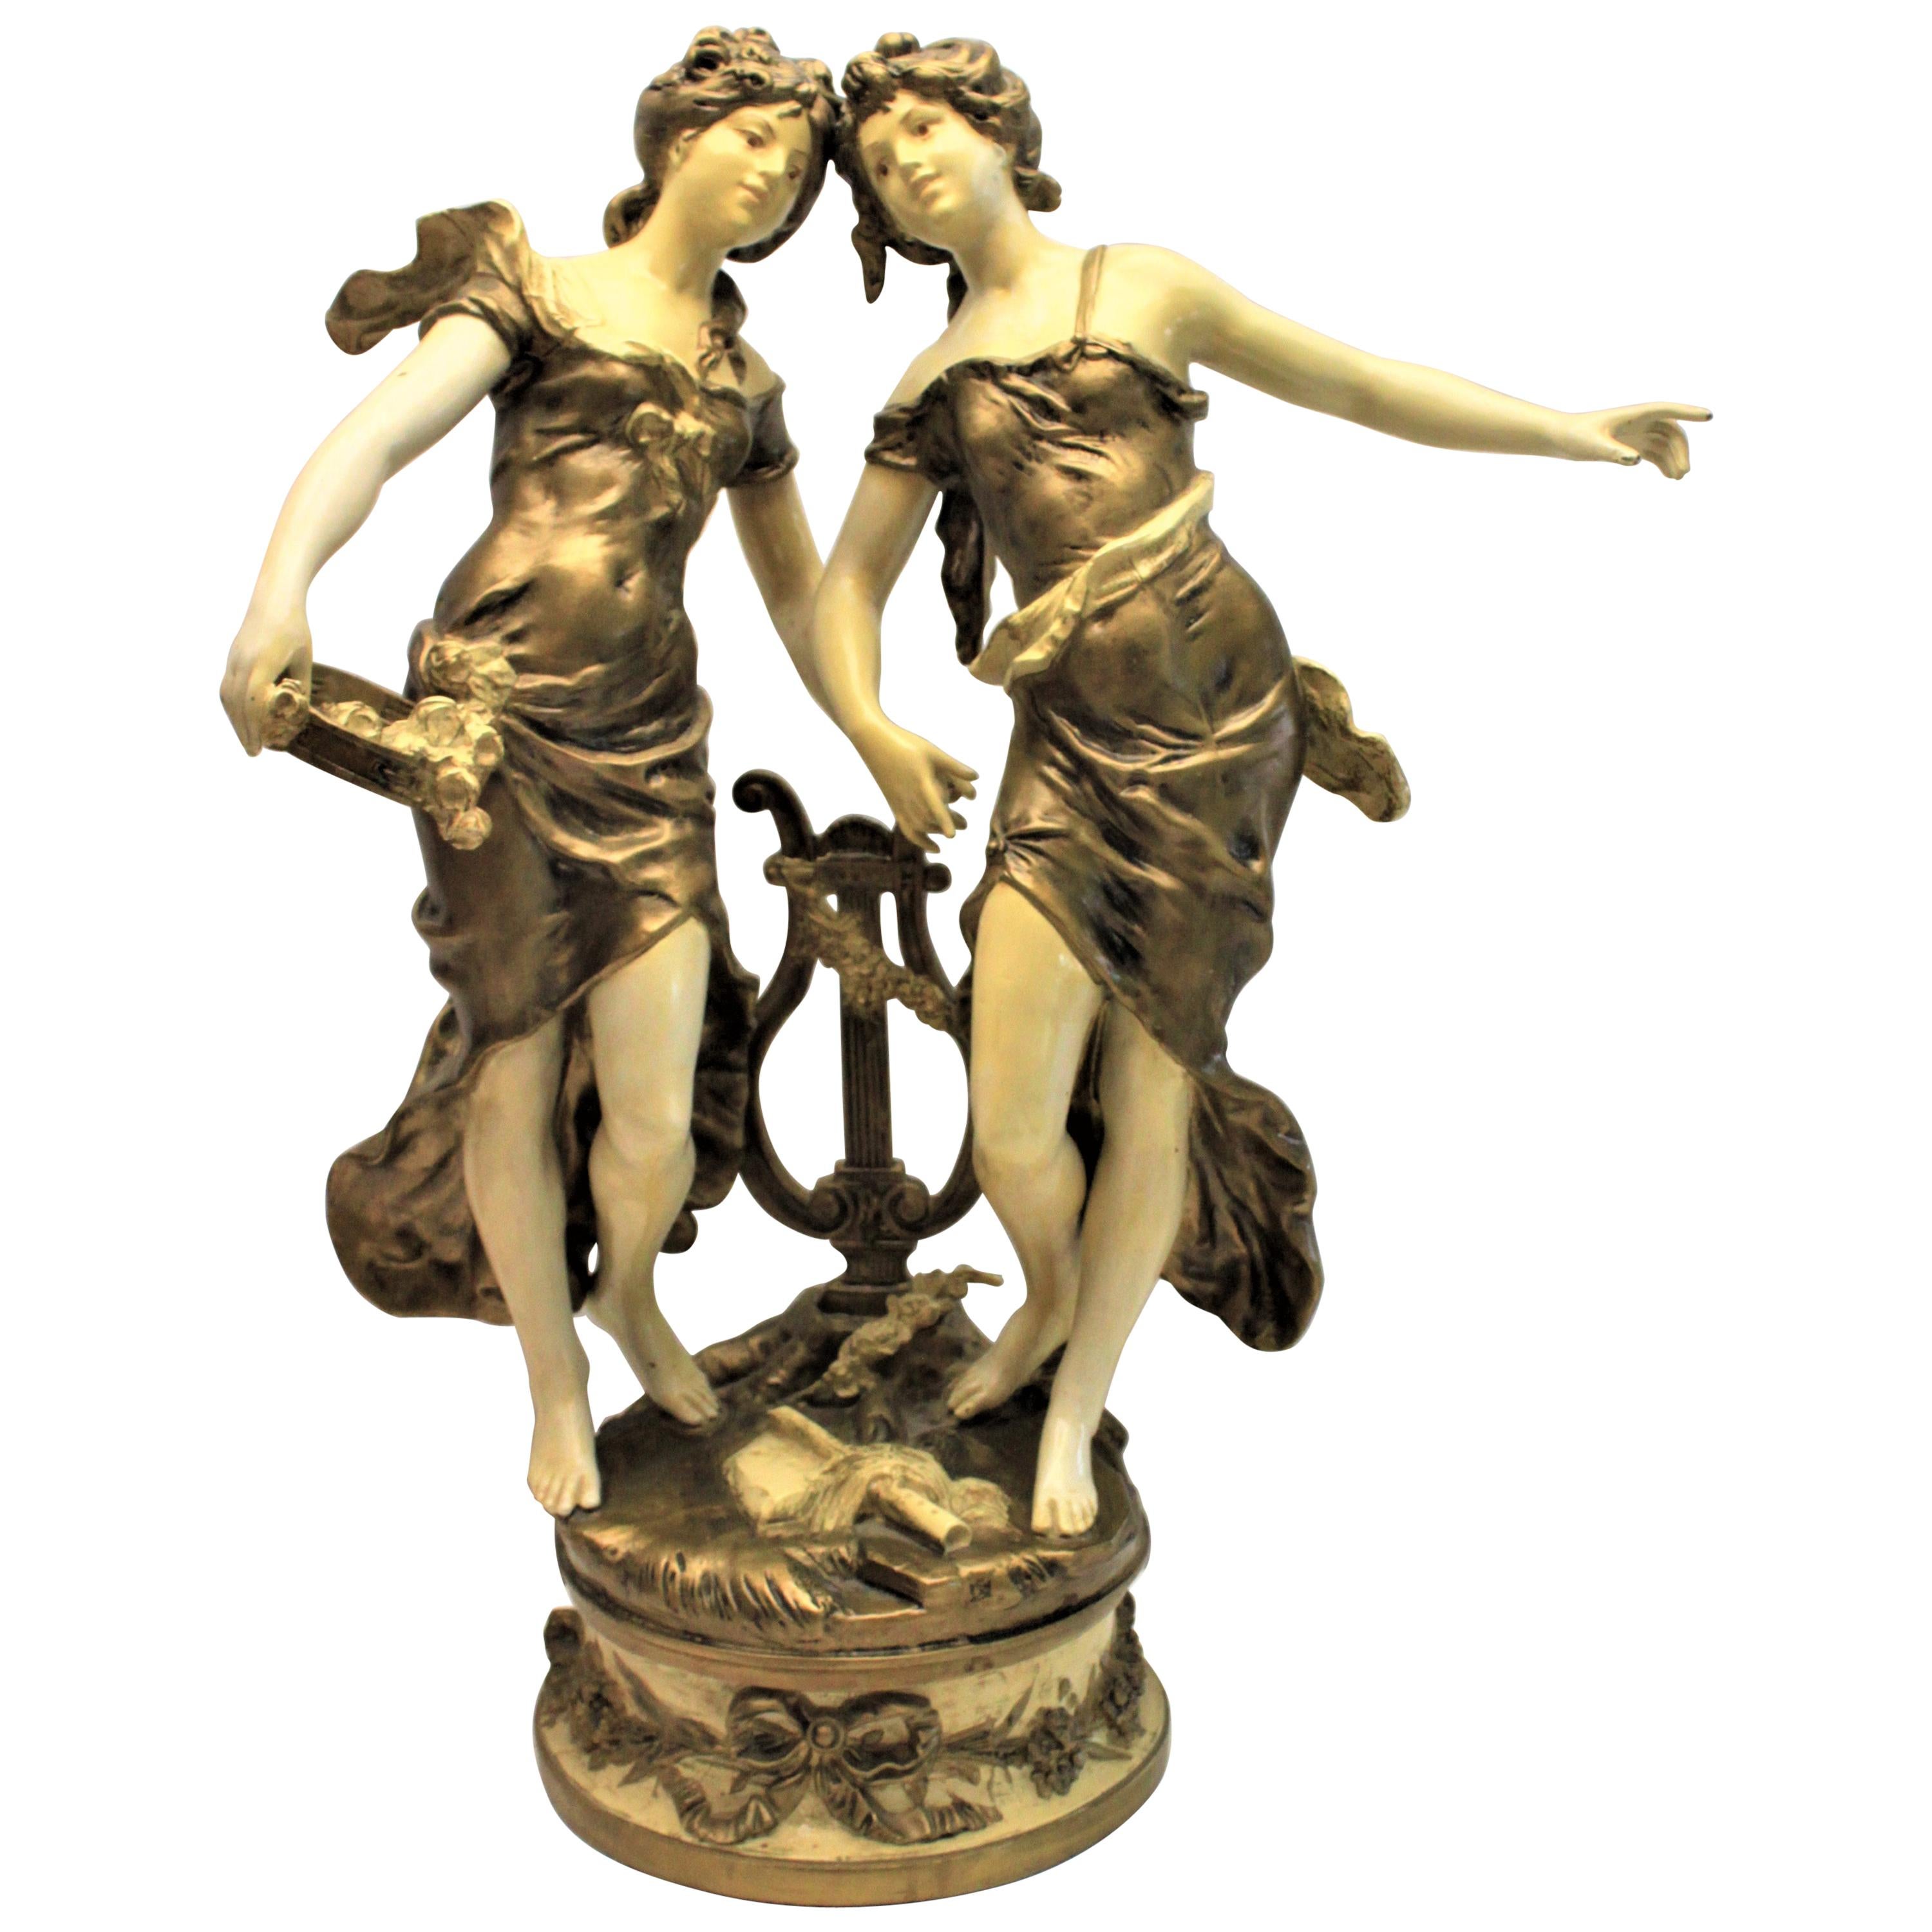 Large Antique Signed Moreau Cast and Cold Painted Sculpture of Dancing Women